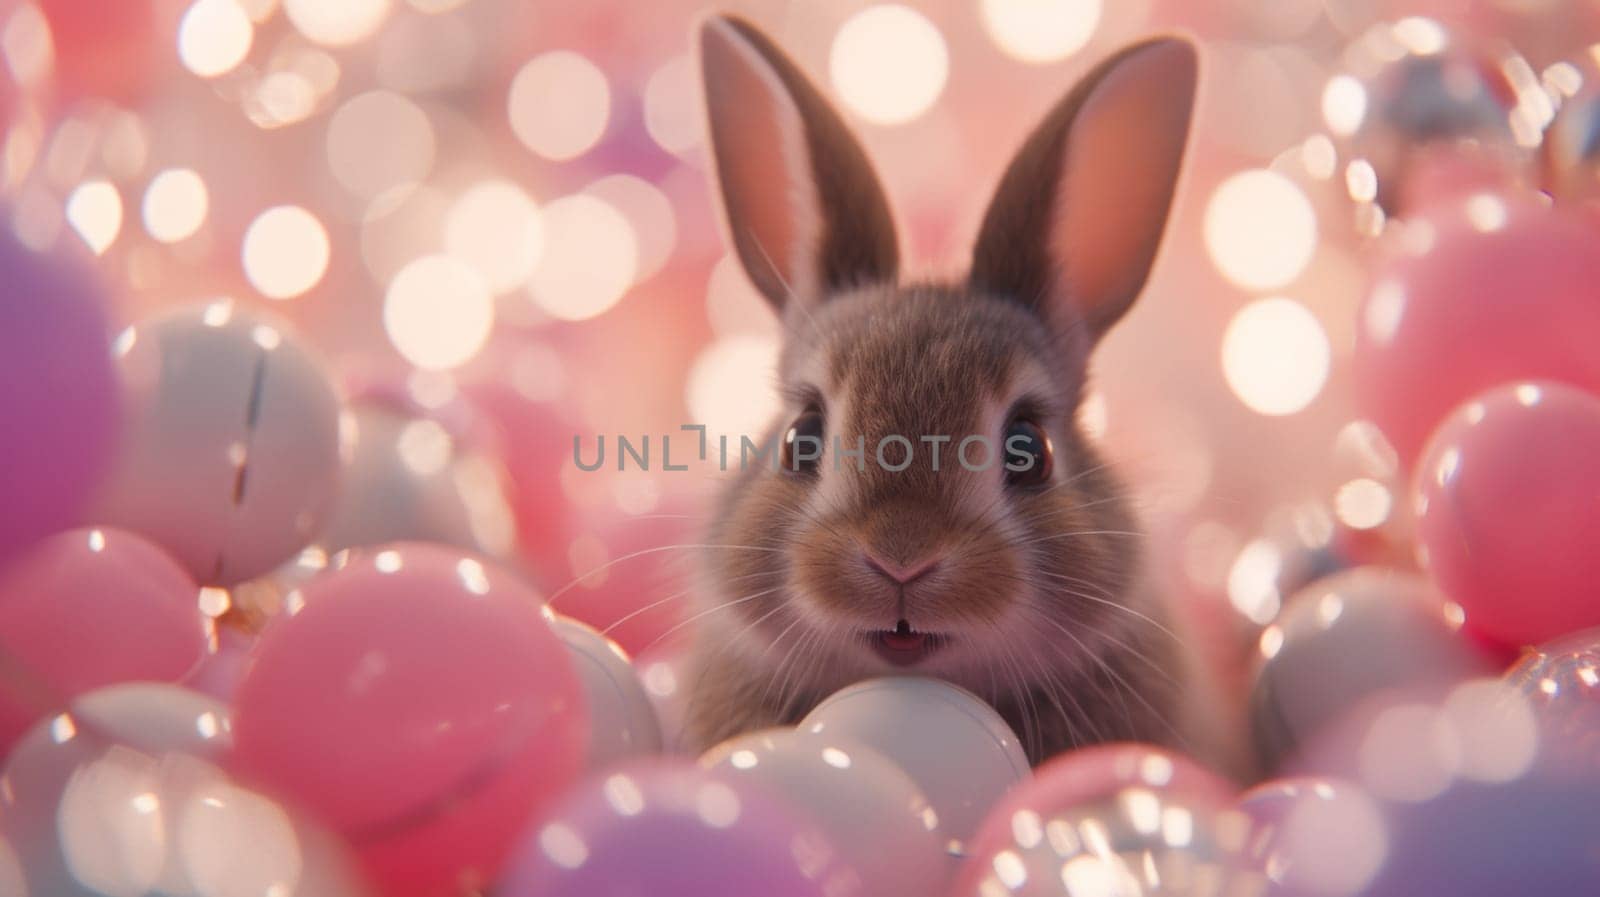 A rabbit sitting in a bunch of pink and white balls, AI by starush